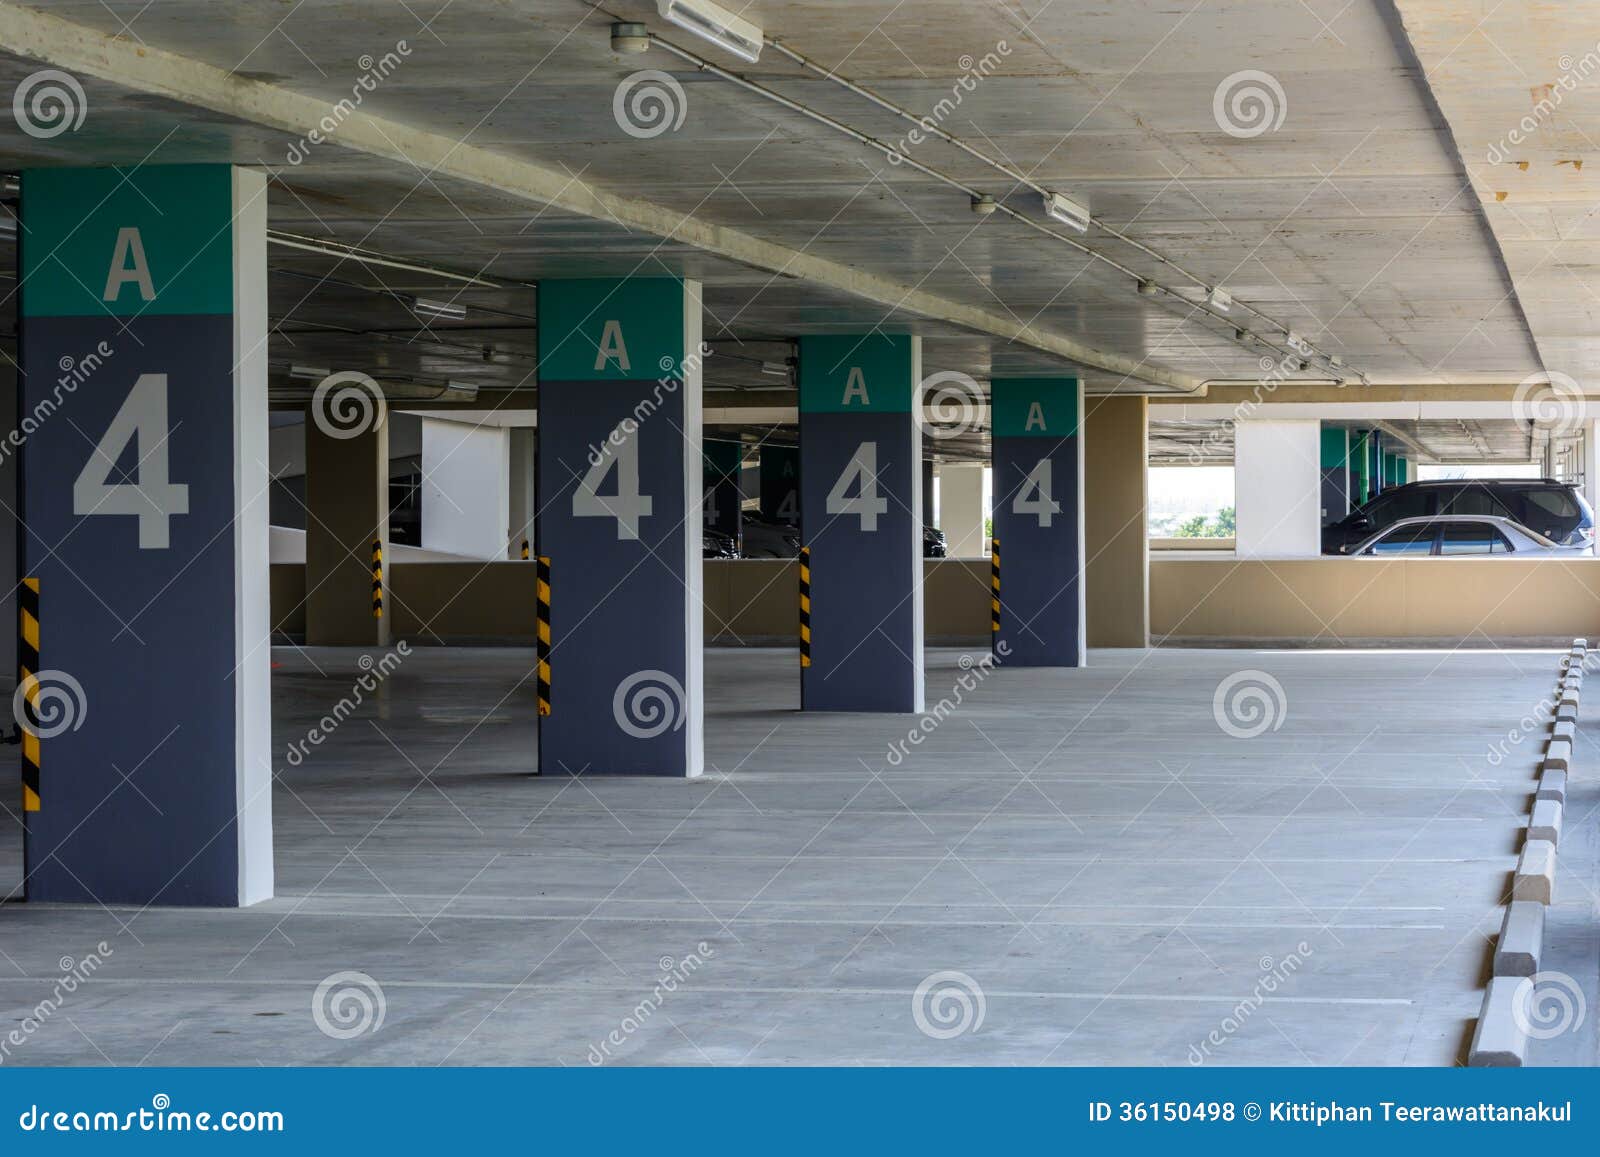 Parking lot stock photo. Image of signs, public, perspective - 36150498